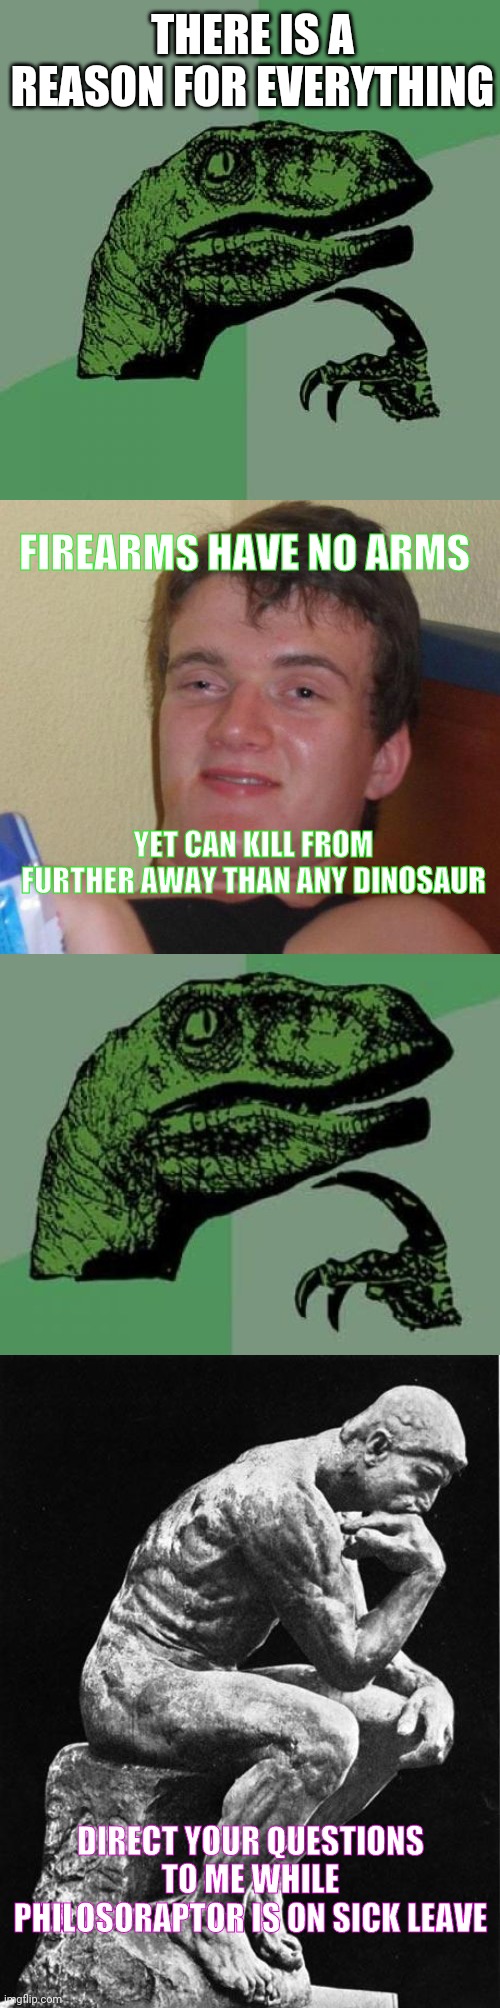 THERE IS A REASON FOR EVERYTHING; FIREARMS HAVE NO ARMS; YET CAN KILL FROM FURTHER AWAY THAN ANY DINOSAUR; DIRECT YOUR QUESTIONS TO ME WHILE PHILOSORAPTOR IS ON SICK LEAVE | image tagged in memes,philosoraptor,10 guy,philosopher | made w/ Imgflip meme maker